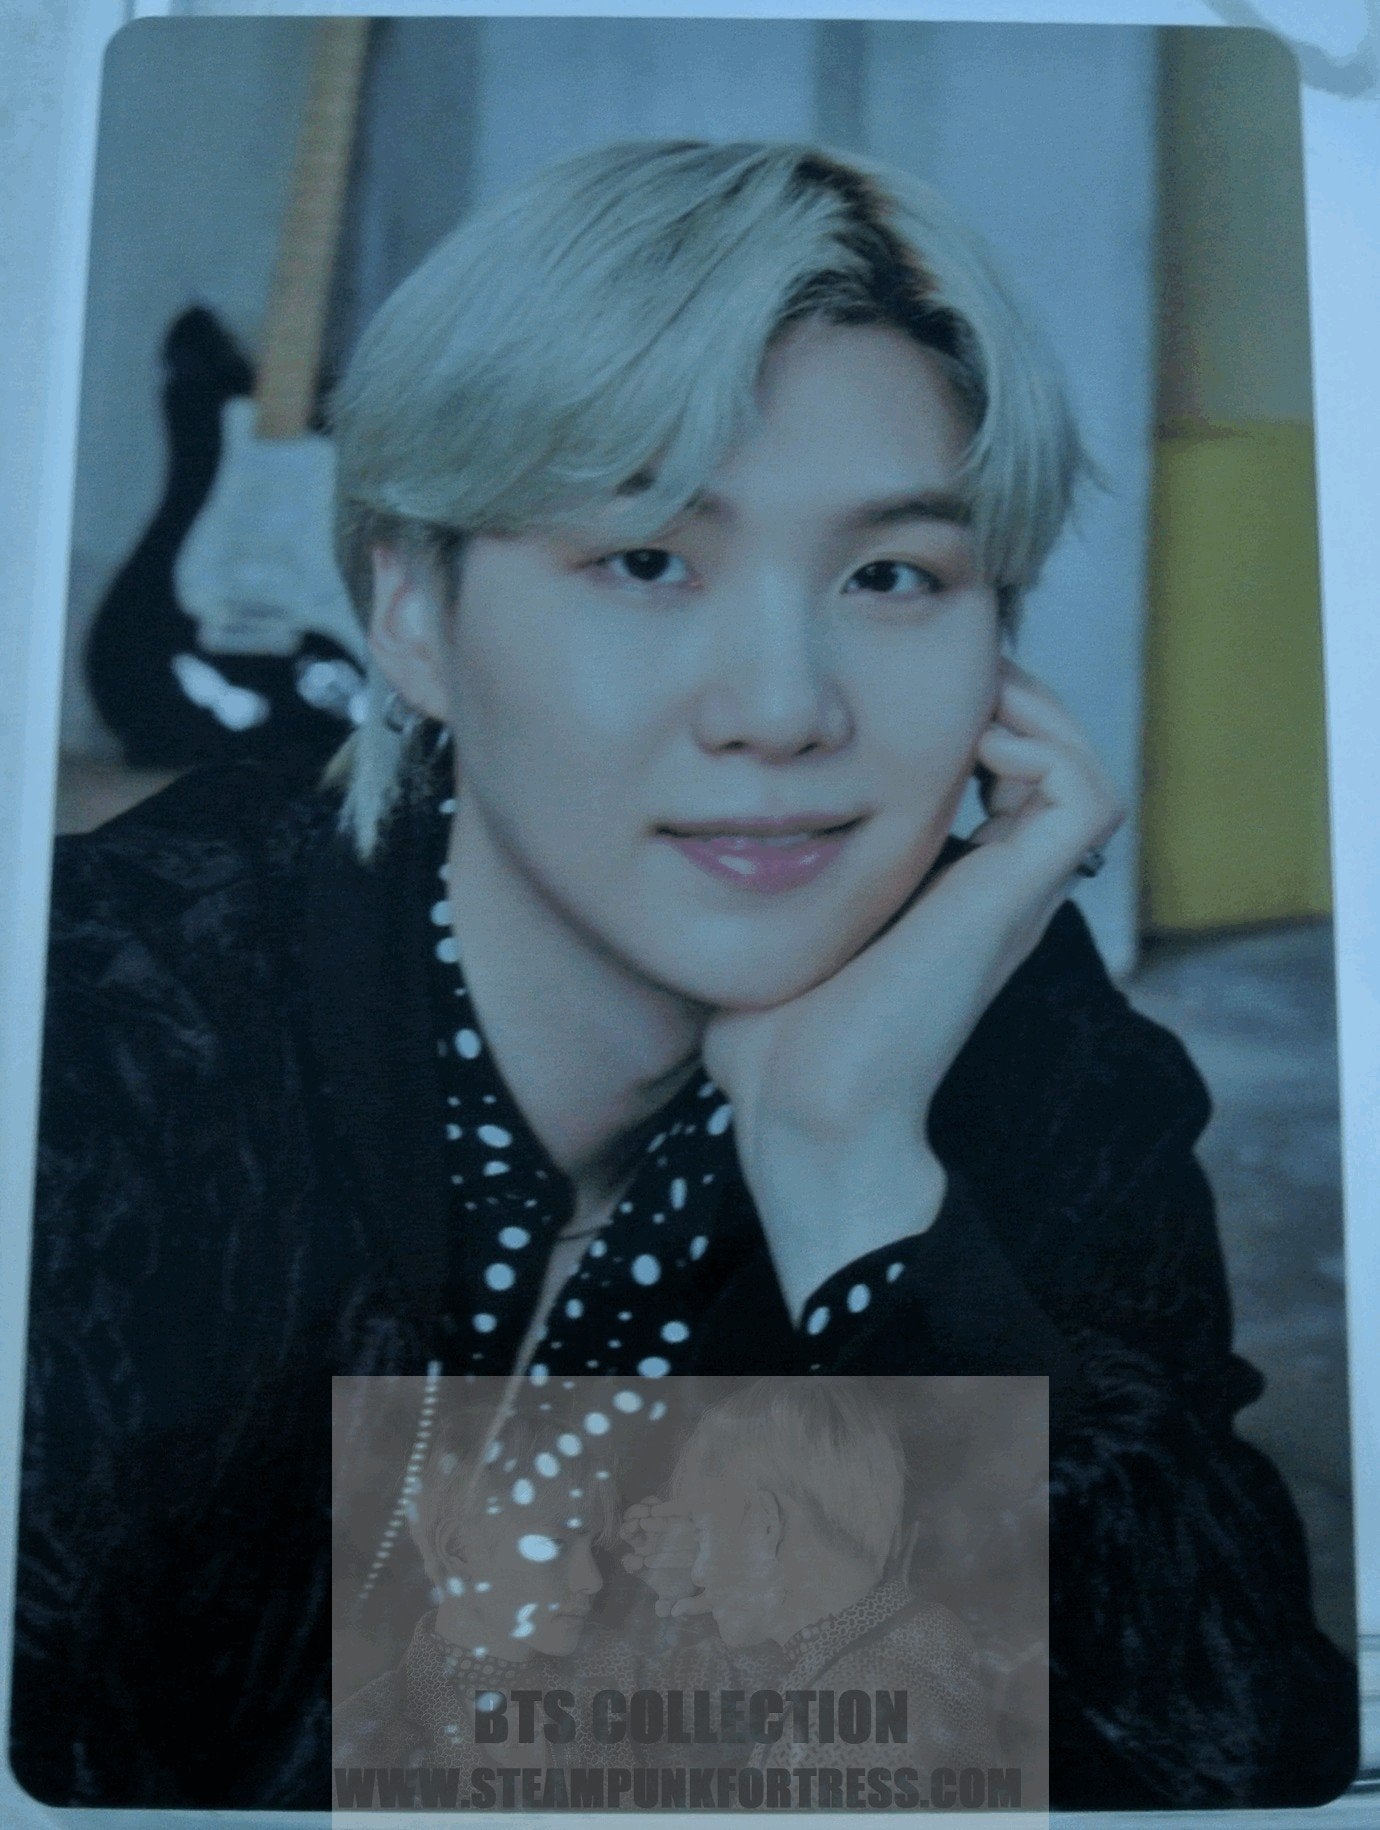 BTS SUGA MIN YOONGI YOON-GI PTD 2021 PERMISSION TO DANCE ON STAGE #1 OF 8 PHOTOCARD PHOTO CARD NEW OFFICIAL MERCHANDISE